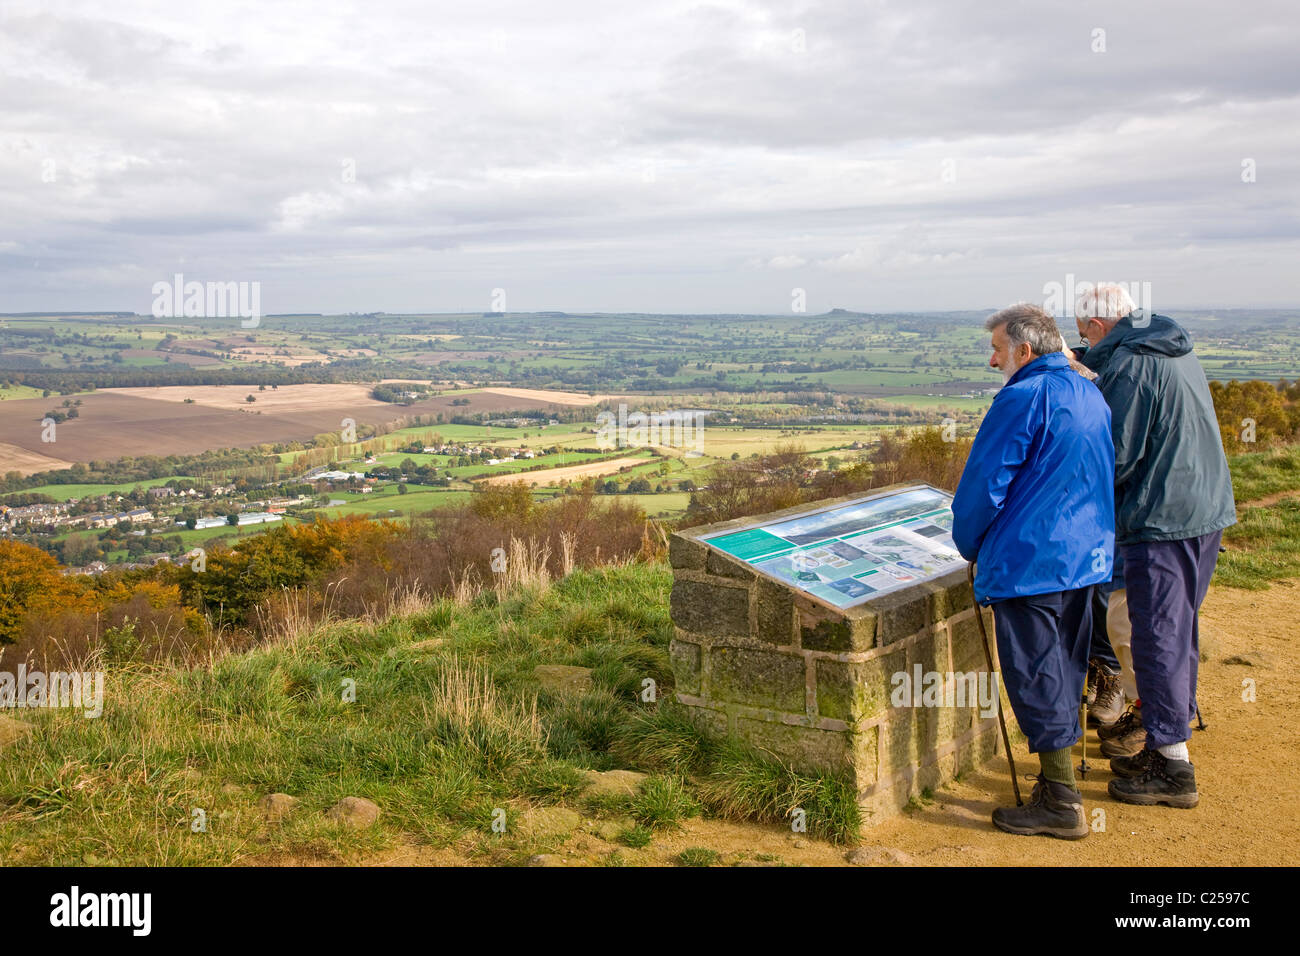 View across Lower Wharfedale and Otley from the Chevin Ridge at Surprise View Stock Photo